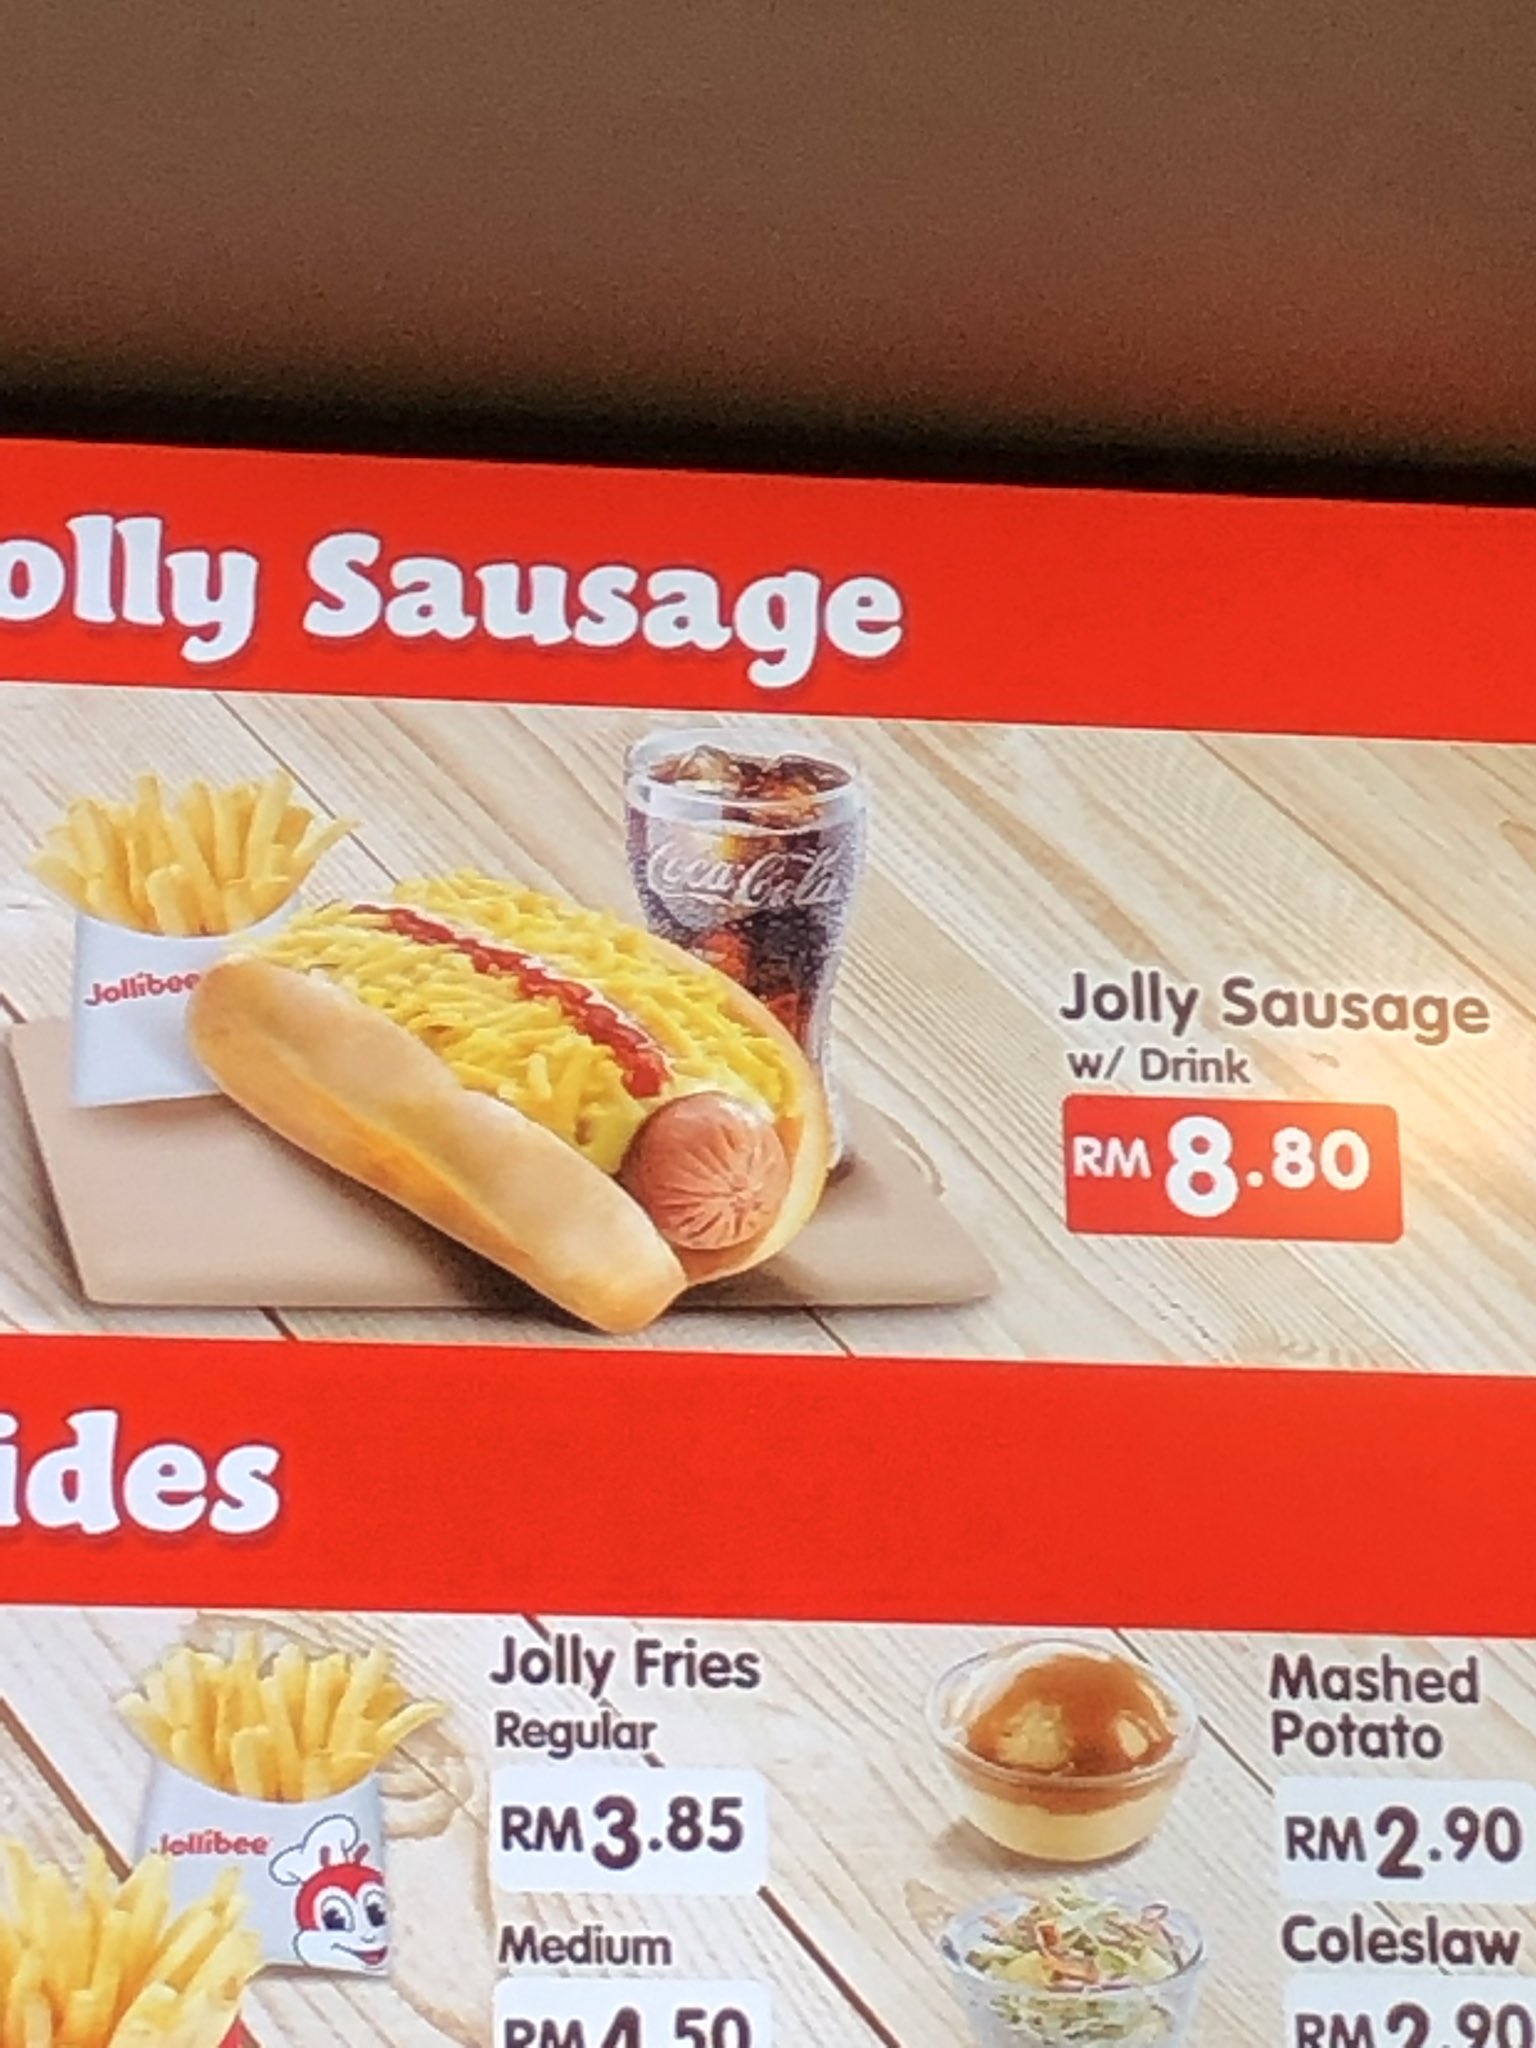 Lloyd On Twitter Jollibee Malaysia Menu Note That They Call Jolly Hotdog Here As Jolly Sausage Coz Having Dog In A Product S Name May Be Seen As Islamic Regulators As Haram